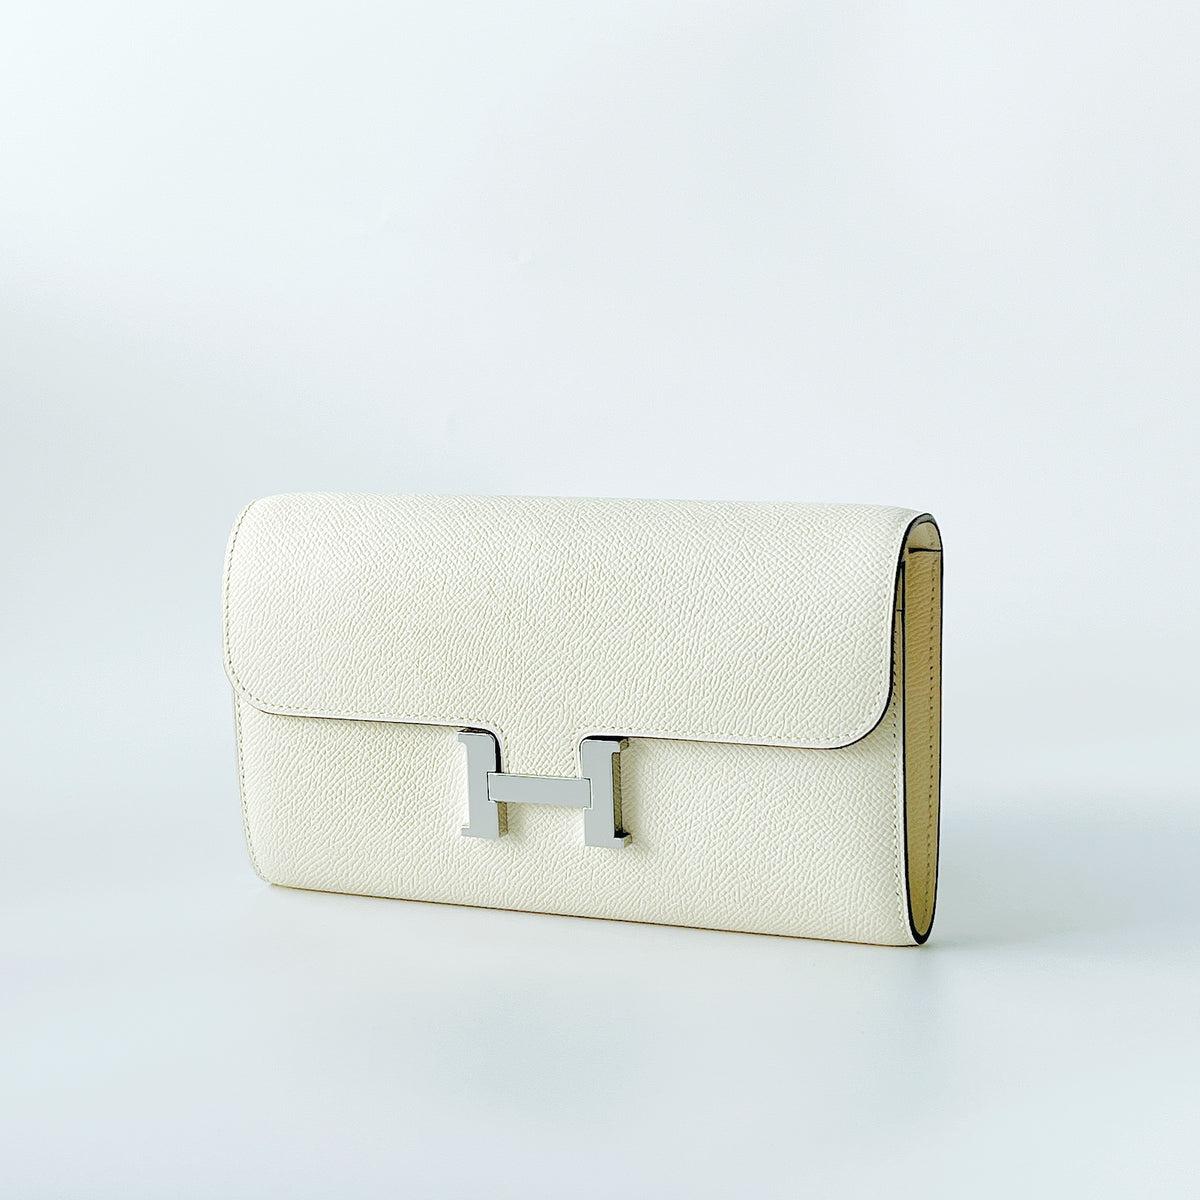 A beautiful Constance Long To Go Wallet In Nata And Gold Hardware. This wallet has a strap making it perfect as a small bag. Inside has 4 credit card slots, 2 pockets, 1 zipped change purse and an exterior pocket. 

Brand: Hermès
Colour: